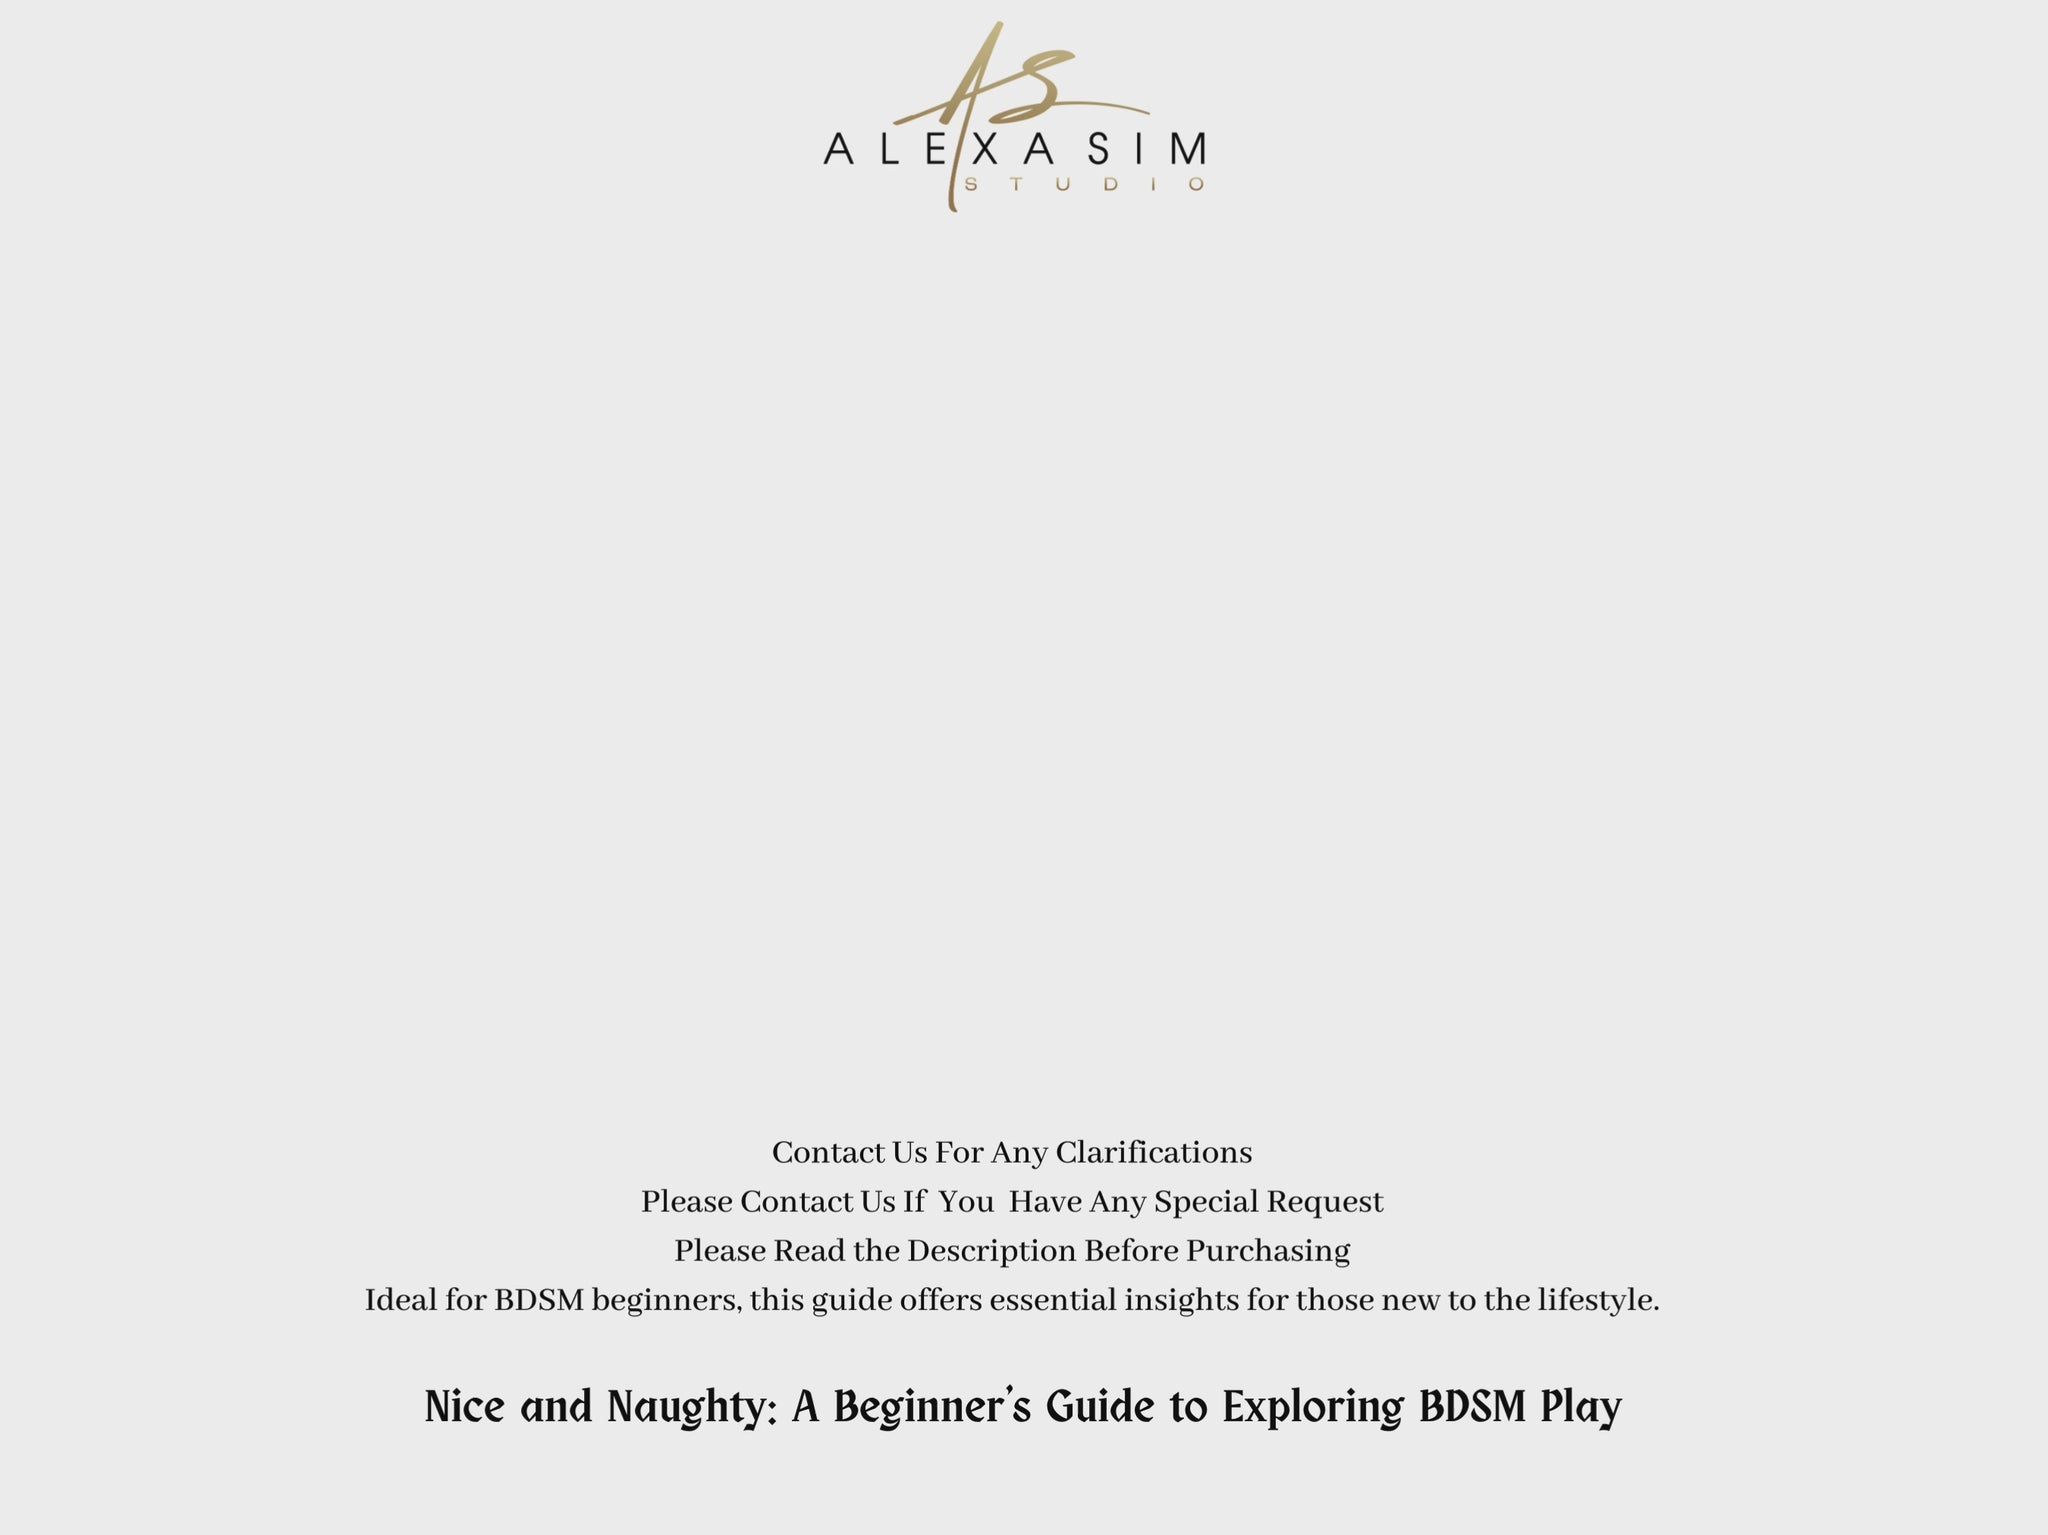 Nice and Naughty A Beginner's Guide to Exploring BDSM Play